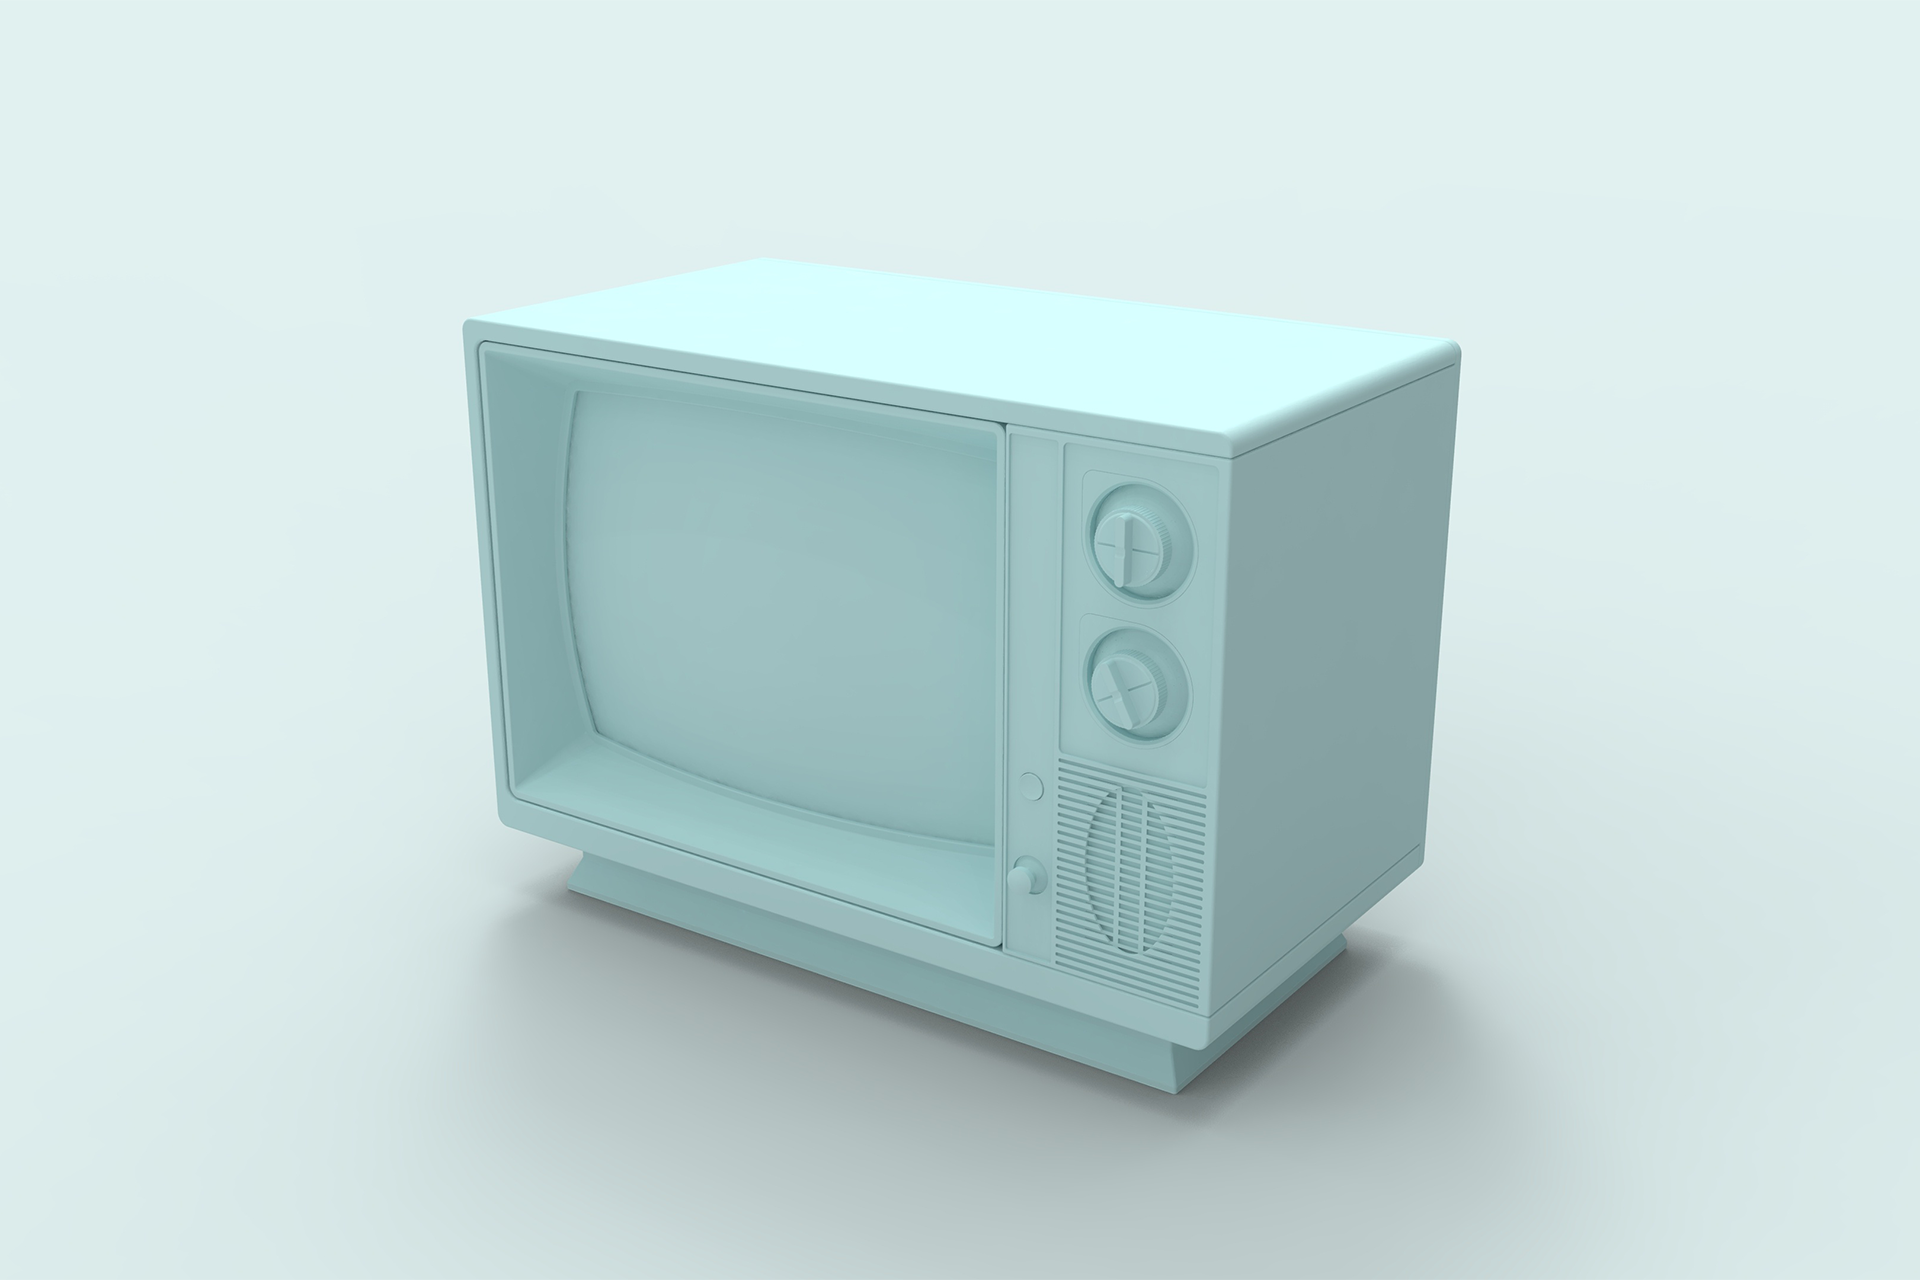 B2B PR involves getting press, including news coverage on TV. That's why this image of a light green TV is being used for this blog on B2B PR strategies - TJ to update